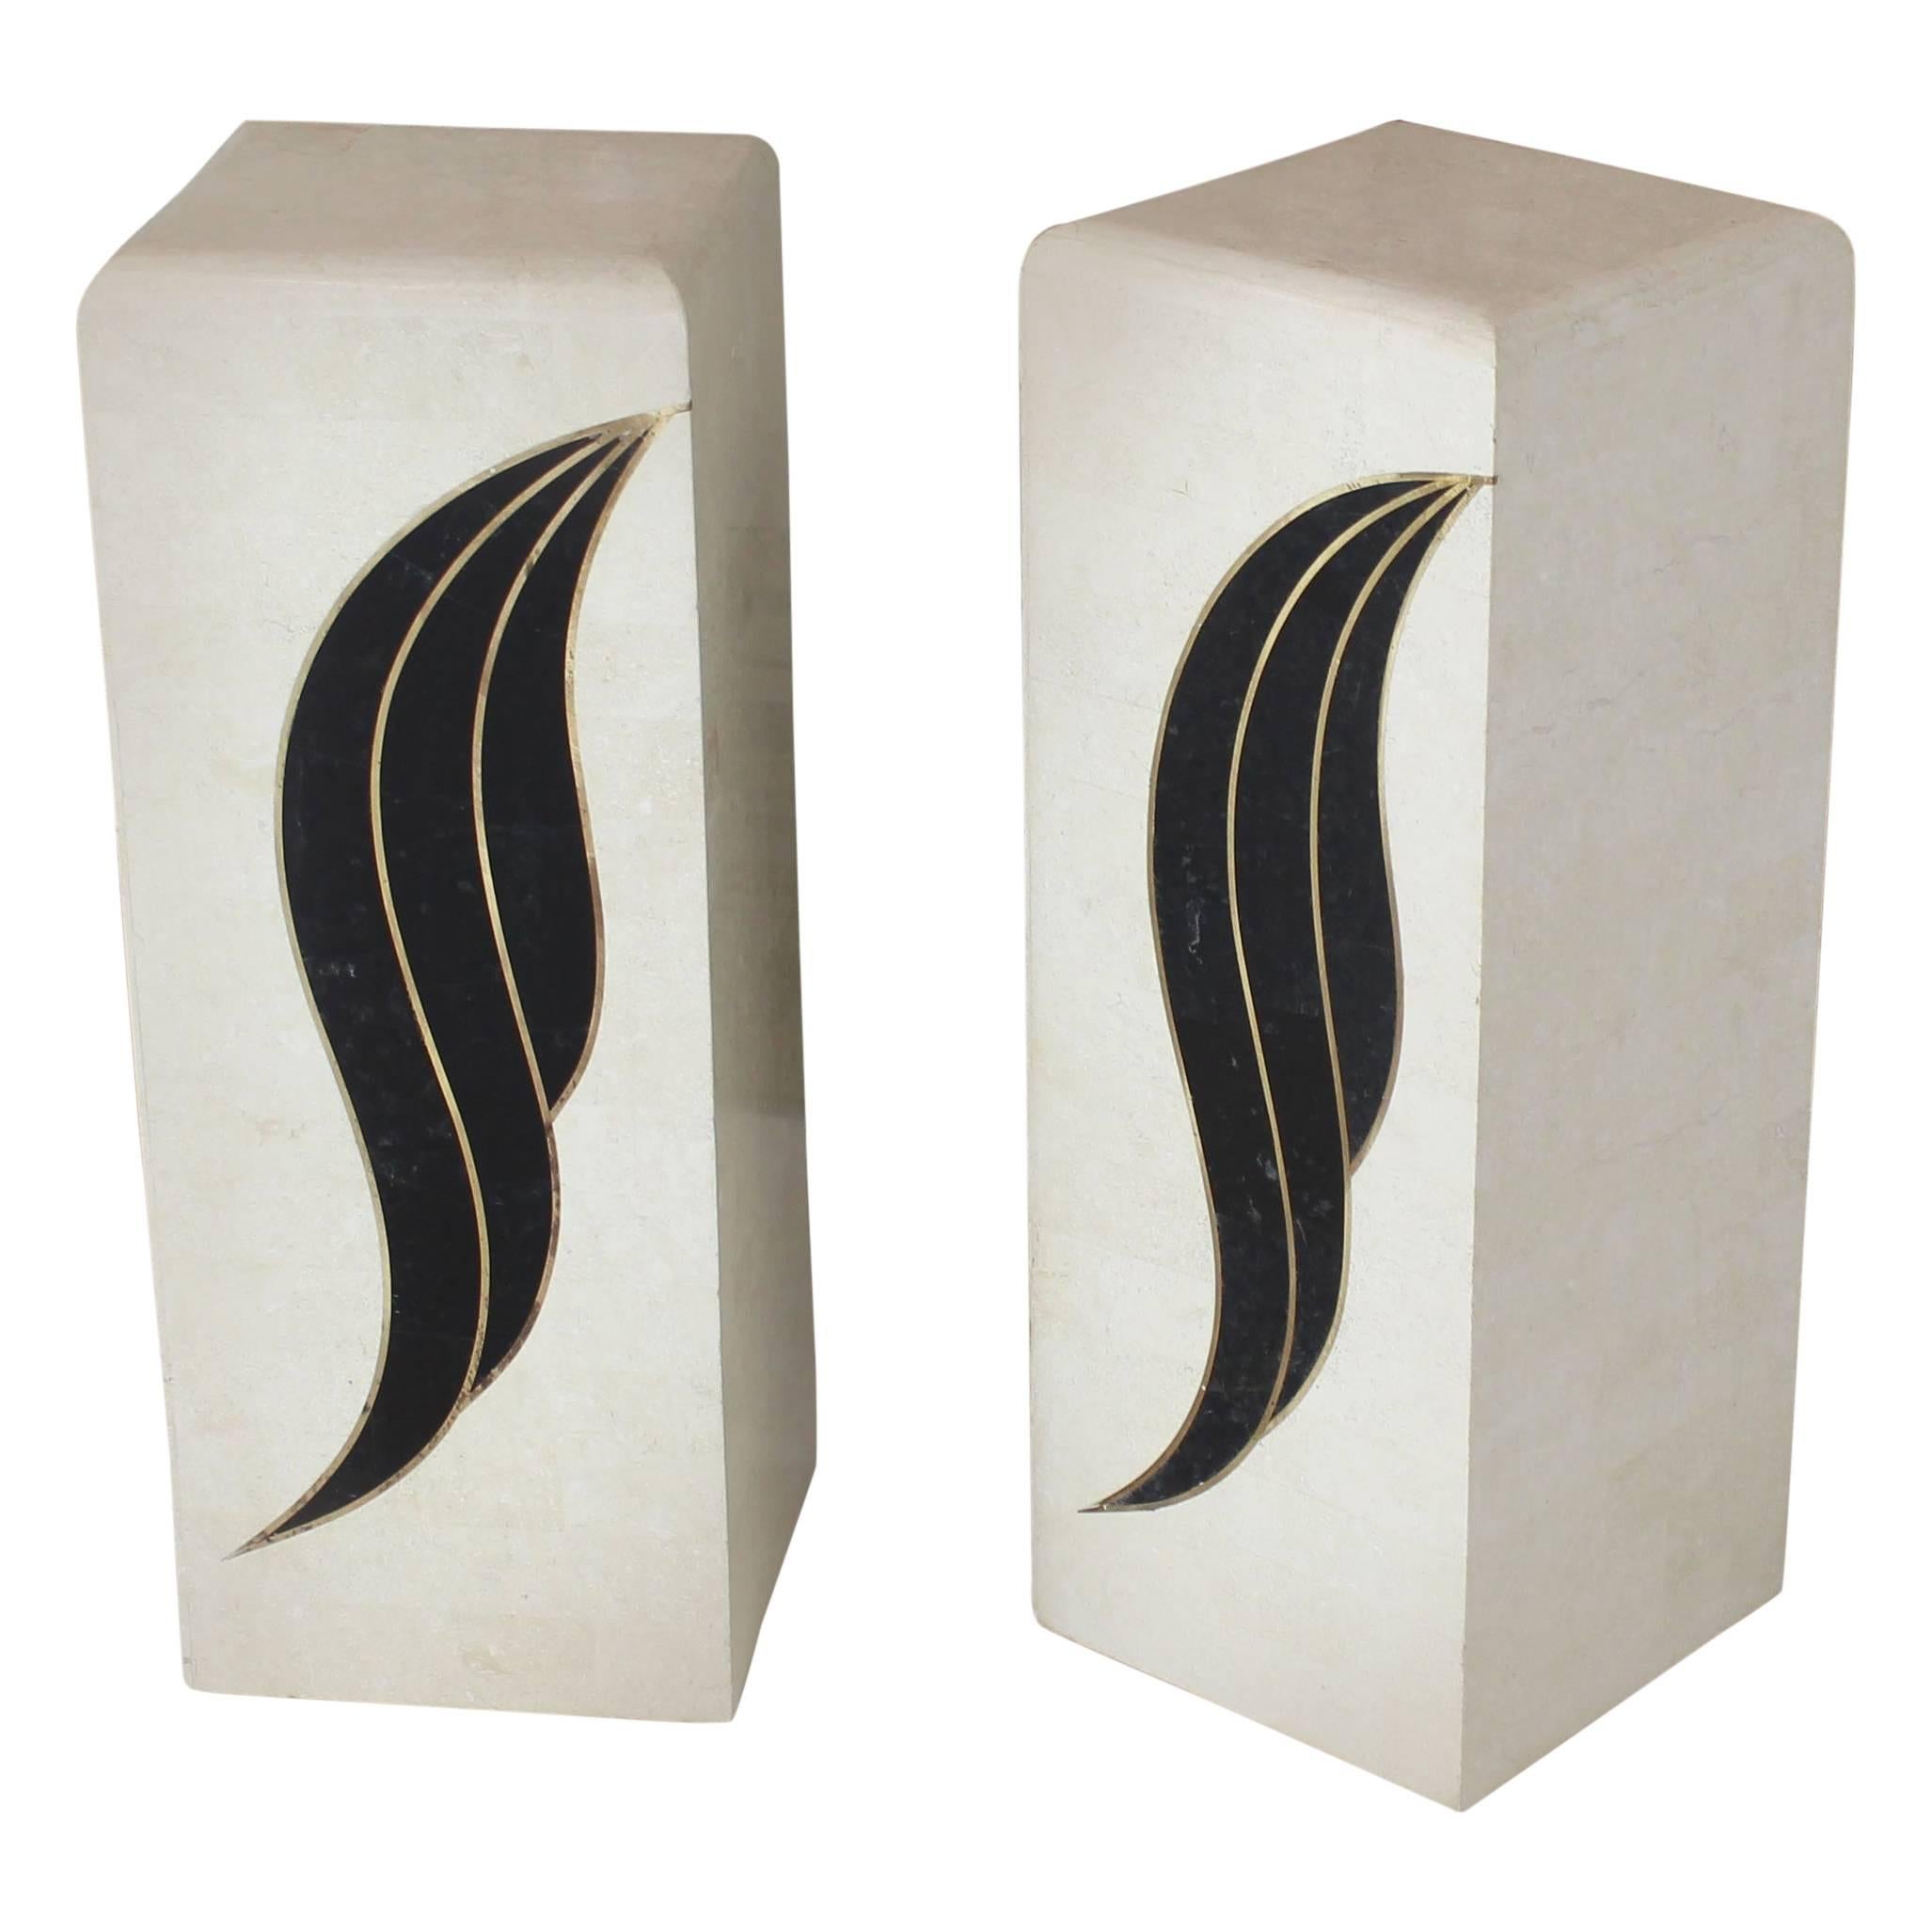 Pair of Tessellated Black and Beige Stone or Tile Brass Inlay Pedestals